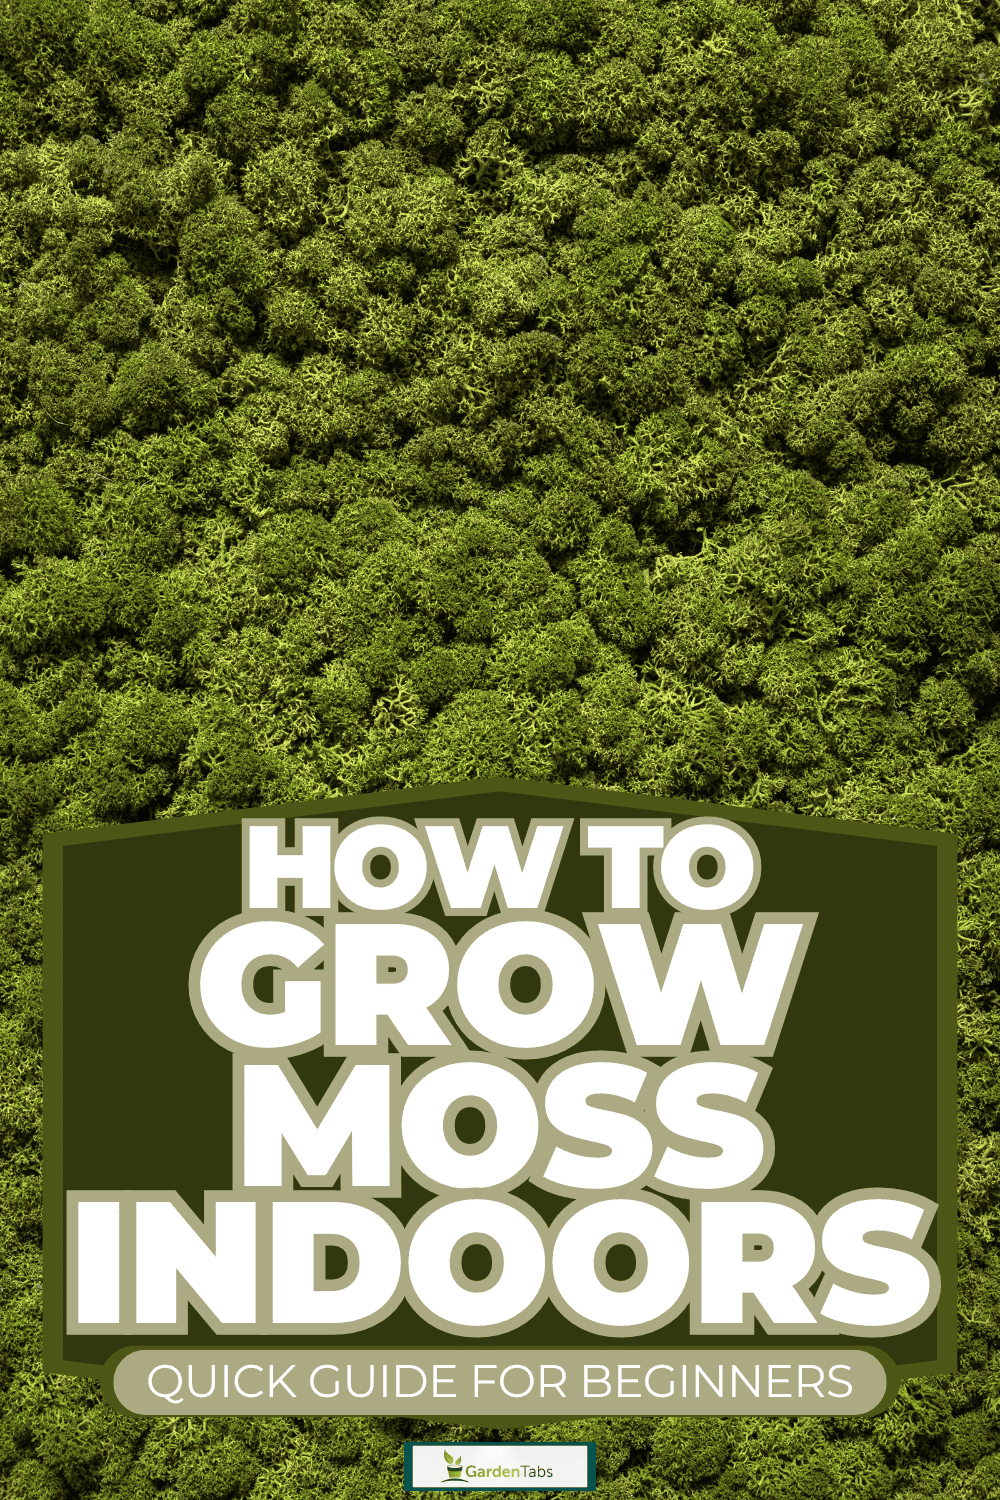 How To Grow Moss Indoors [Quick Guide For Beginners]